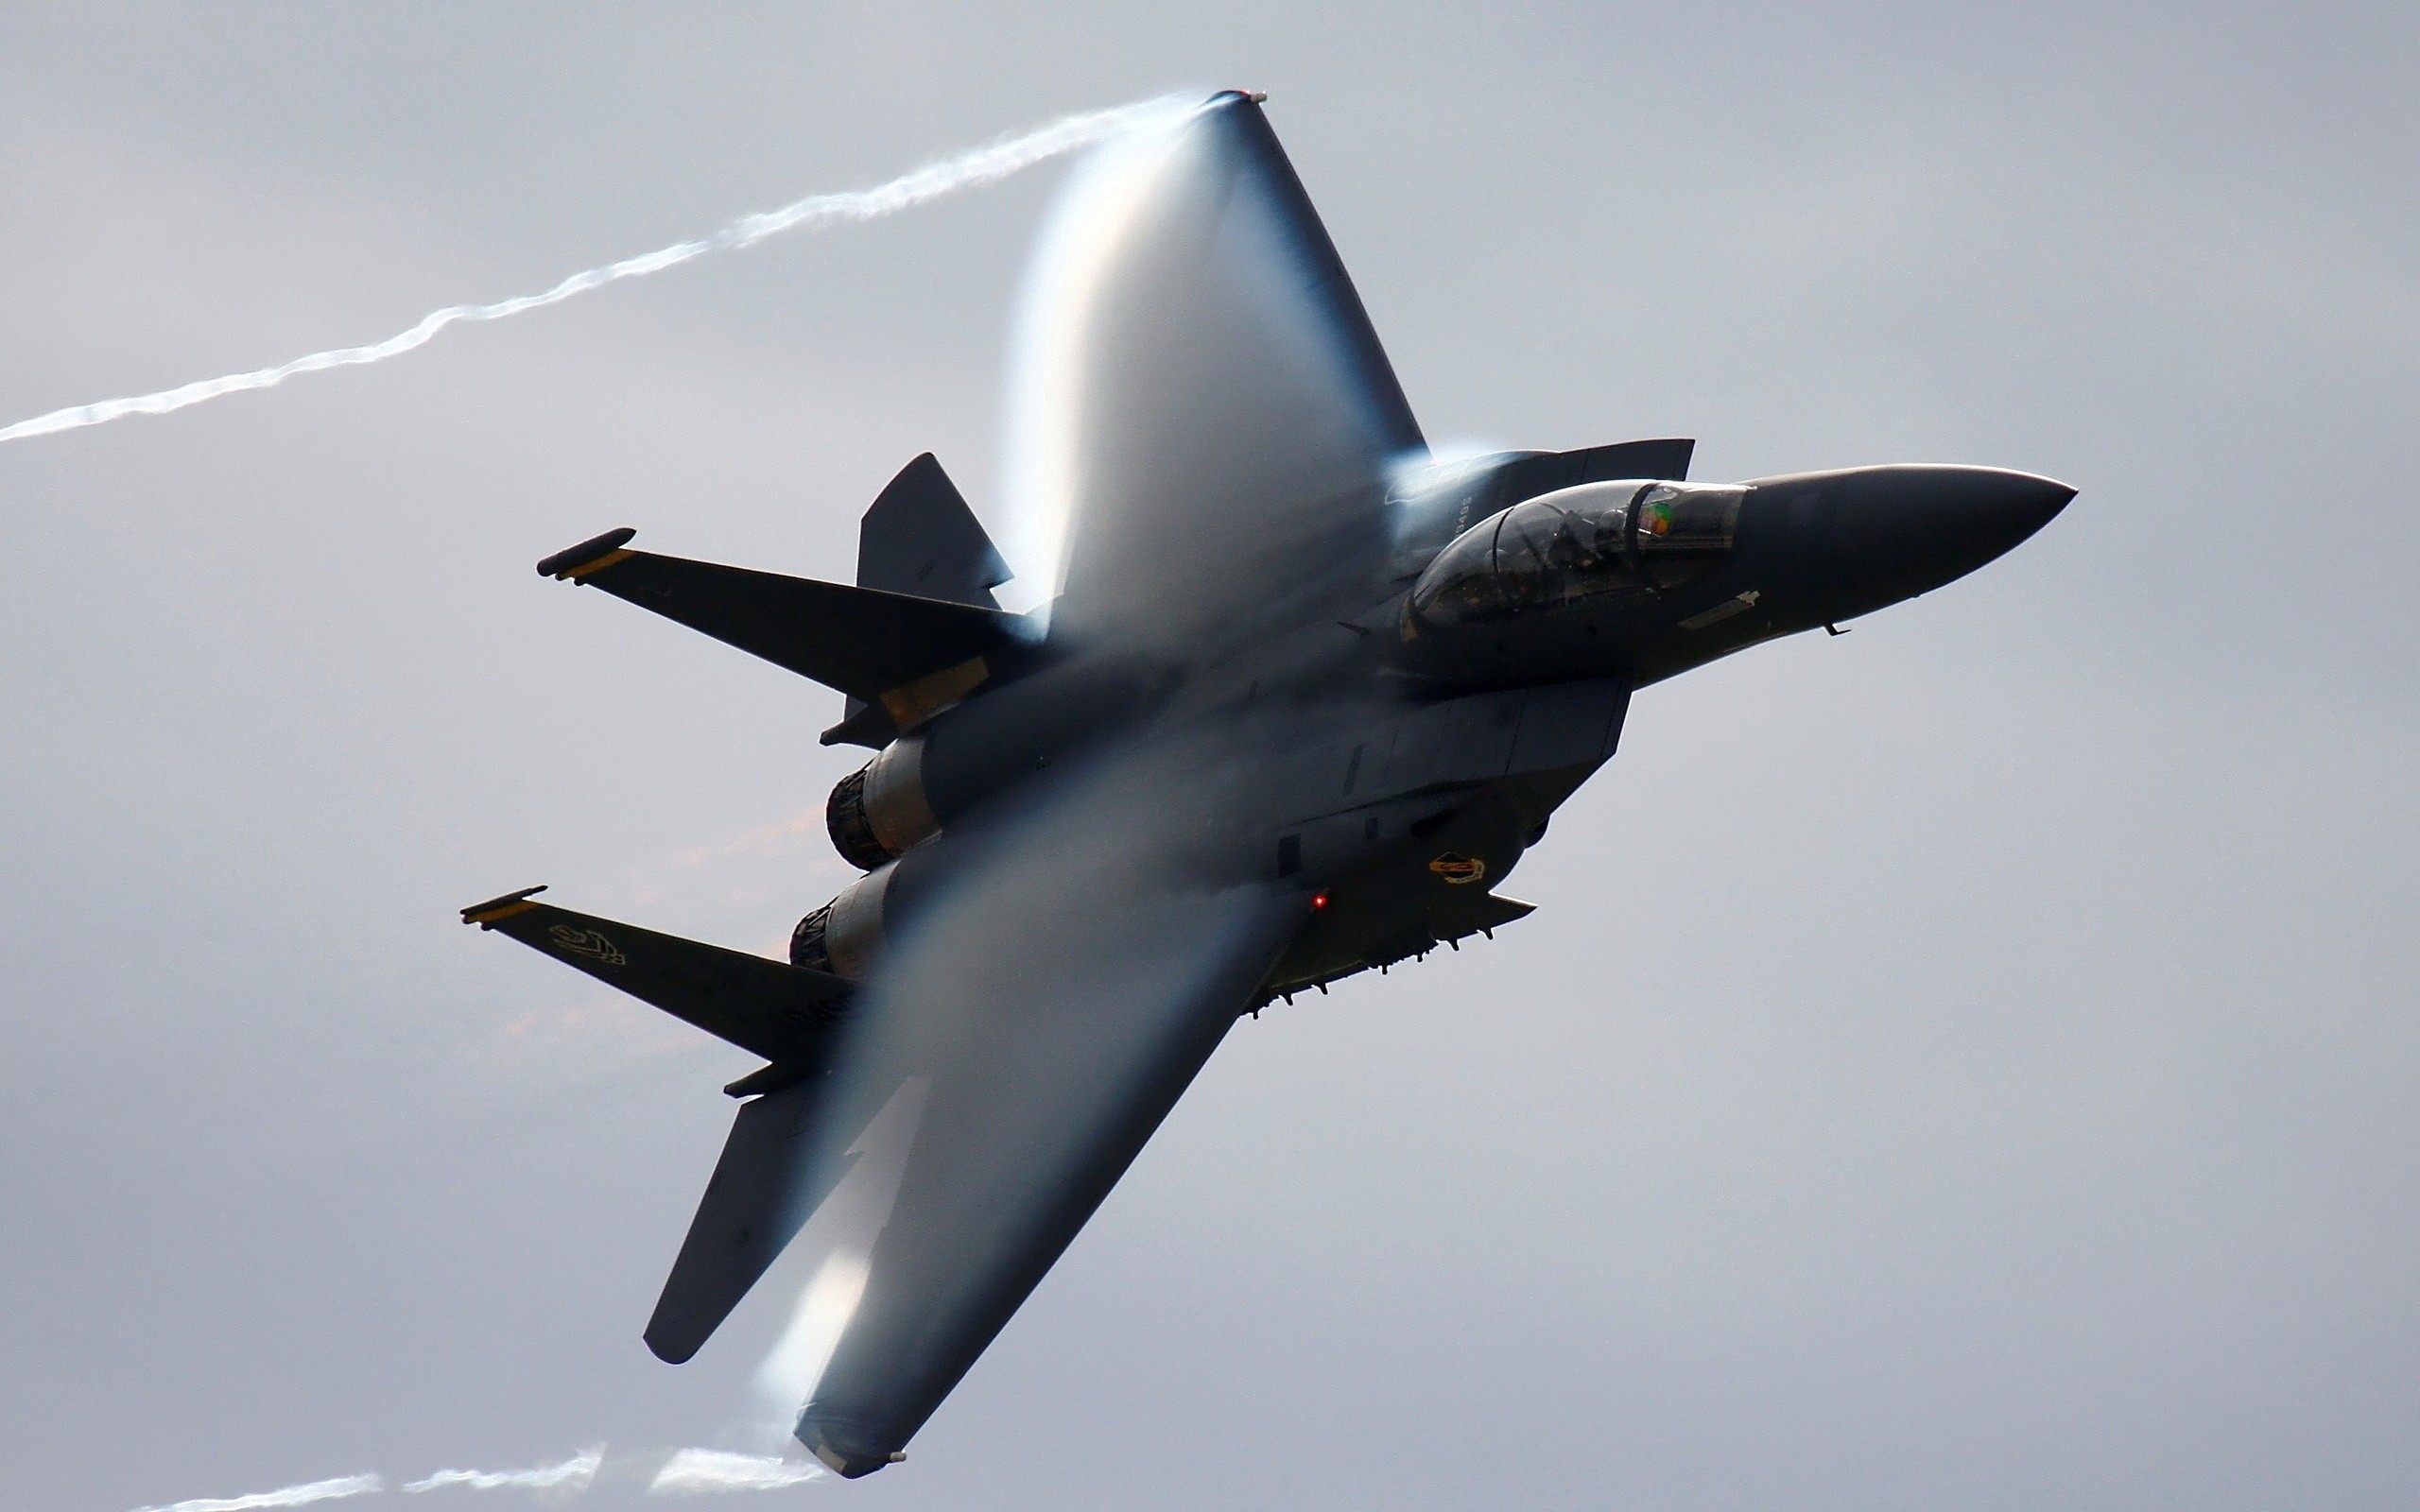 f15-eagle-aircraft-contrails-fighters-2560x1600-wallpaper.jpg